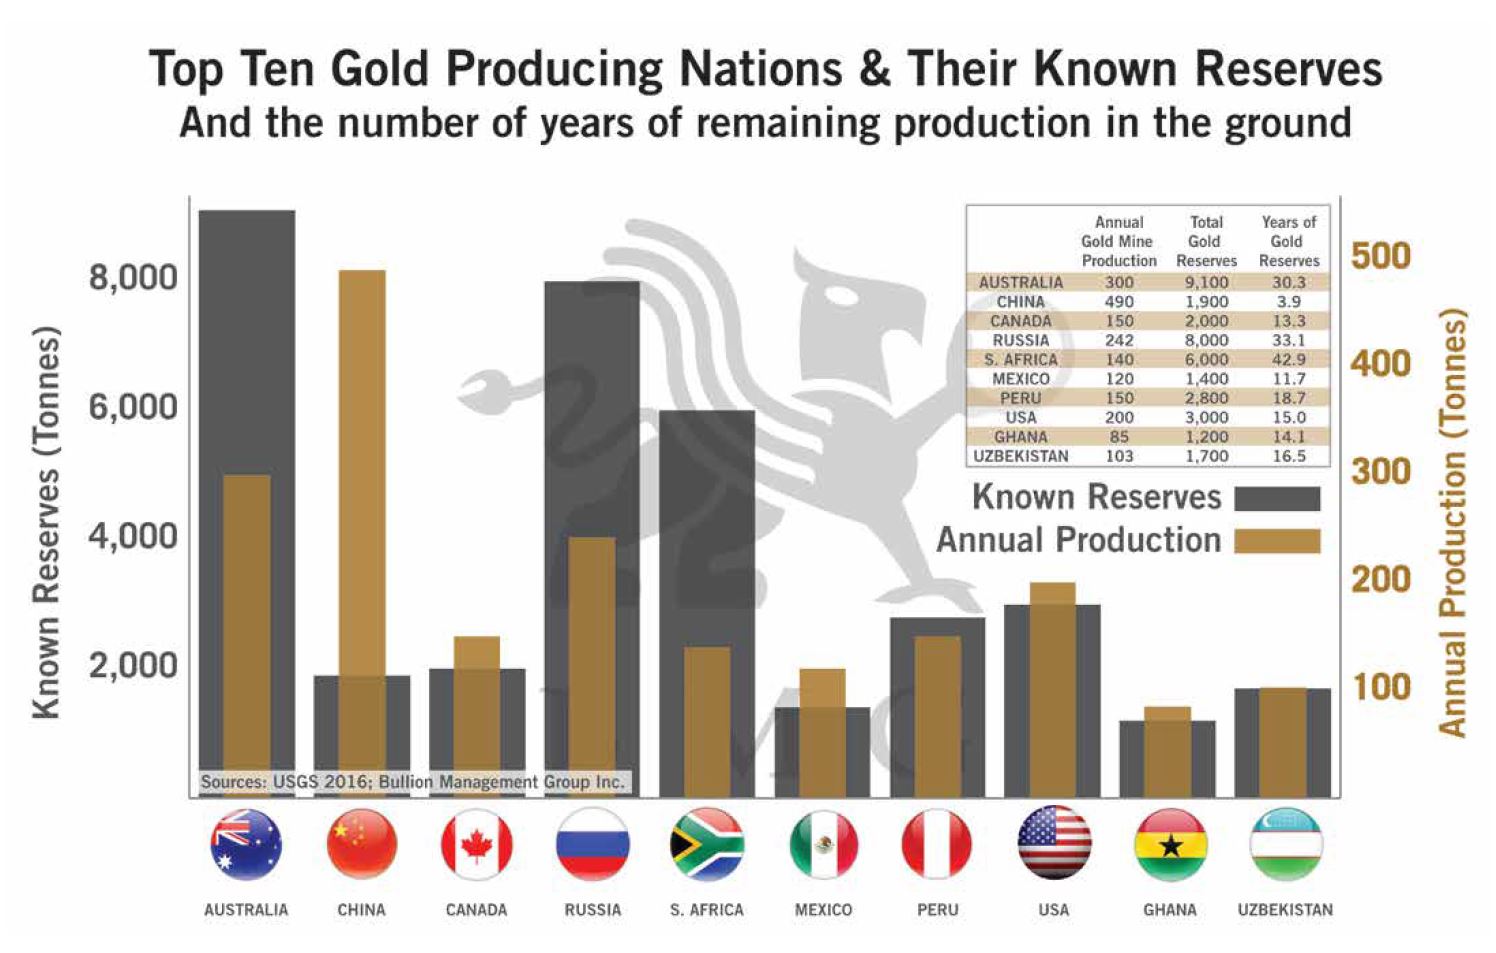 Top Ten Gold Producing Nations & Their Known Reserves